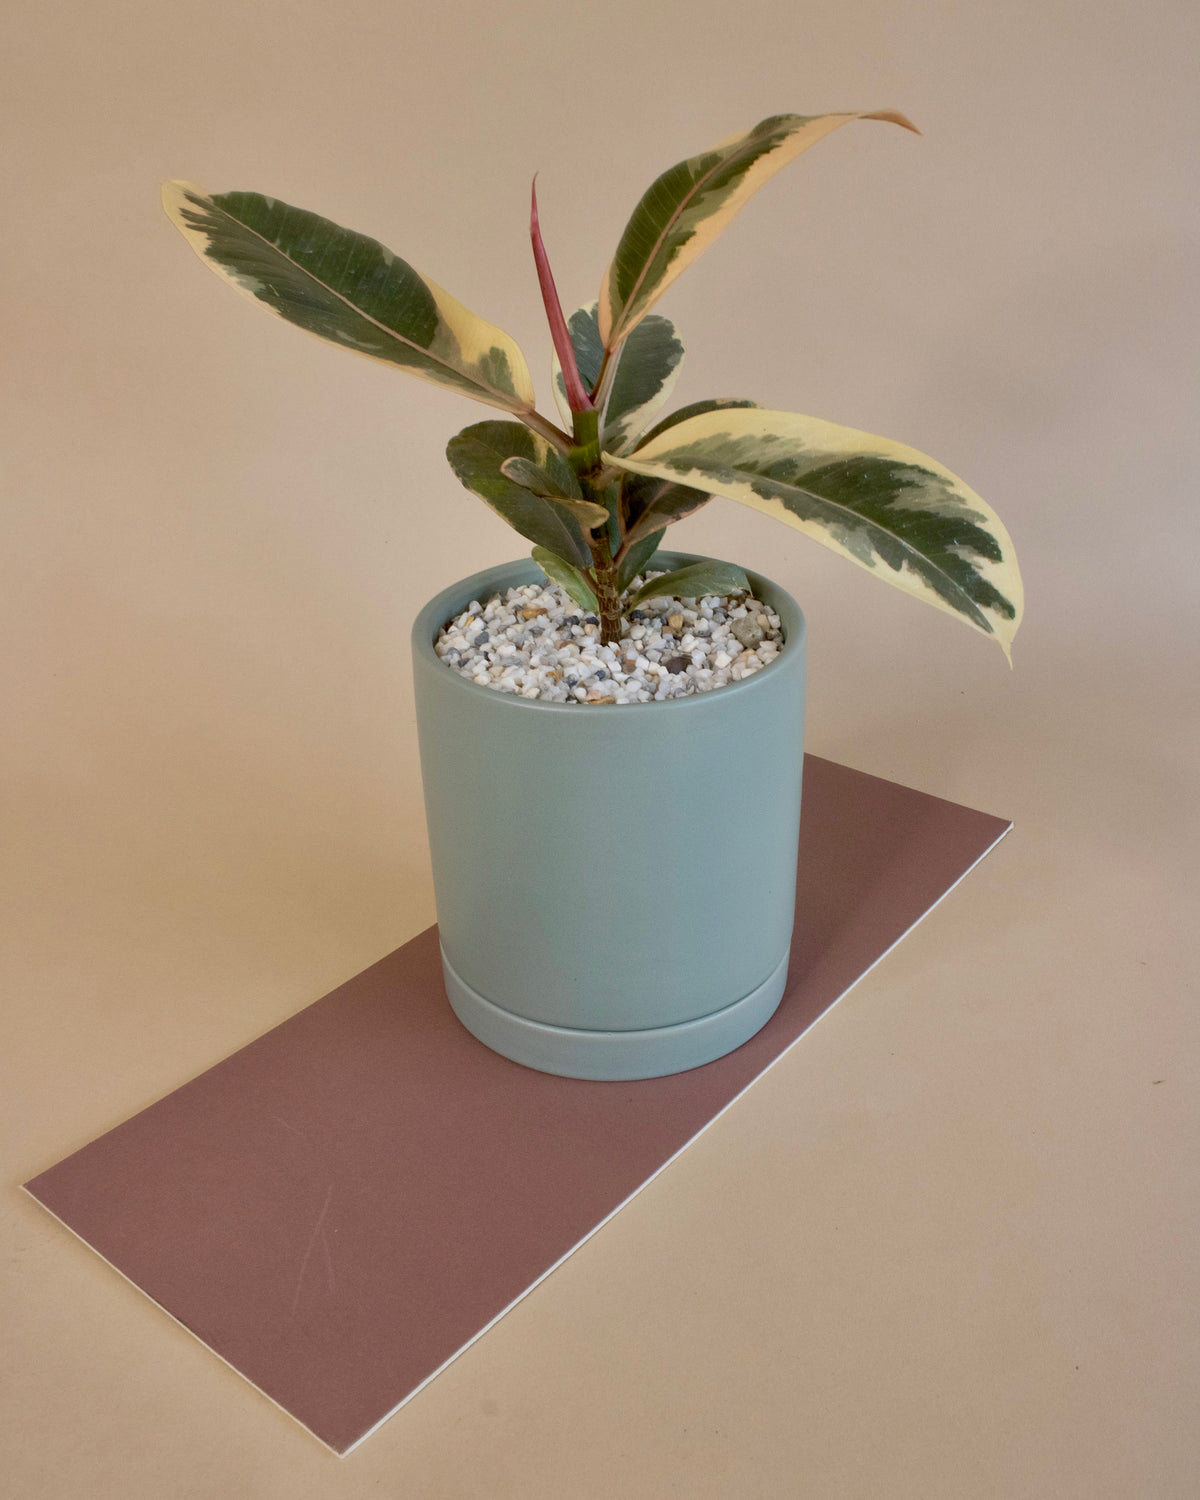 Lights Up A Room | Potted Plant Gift